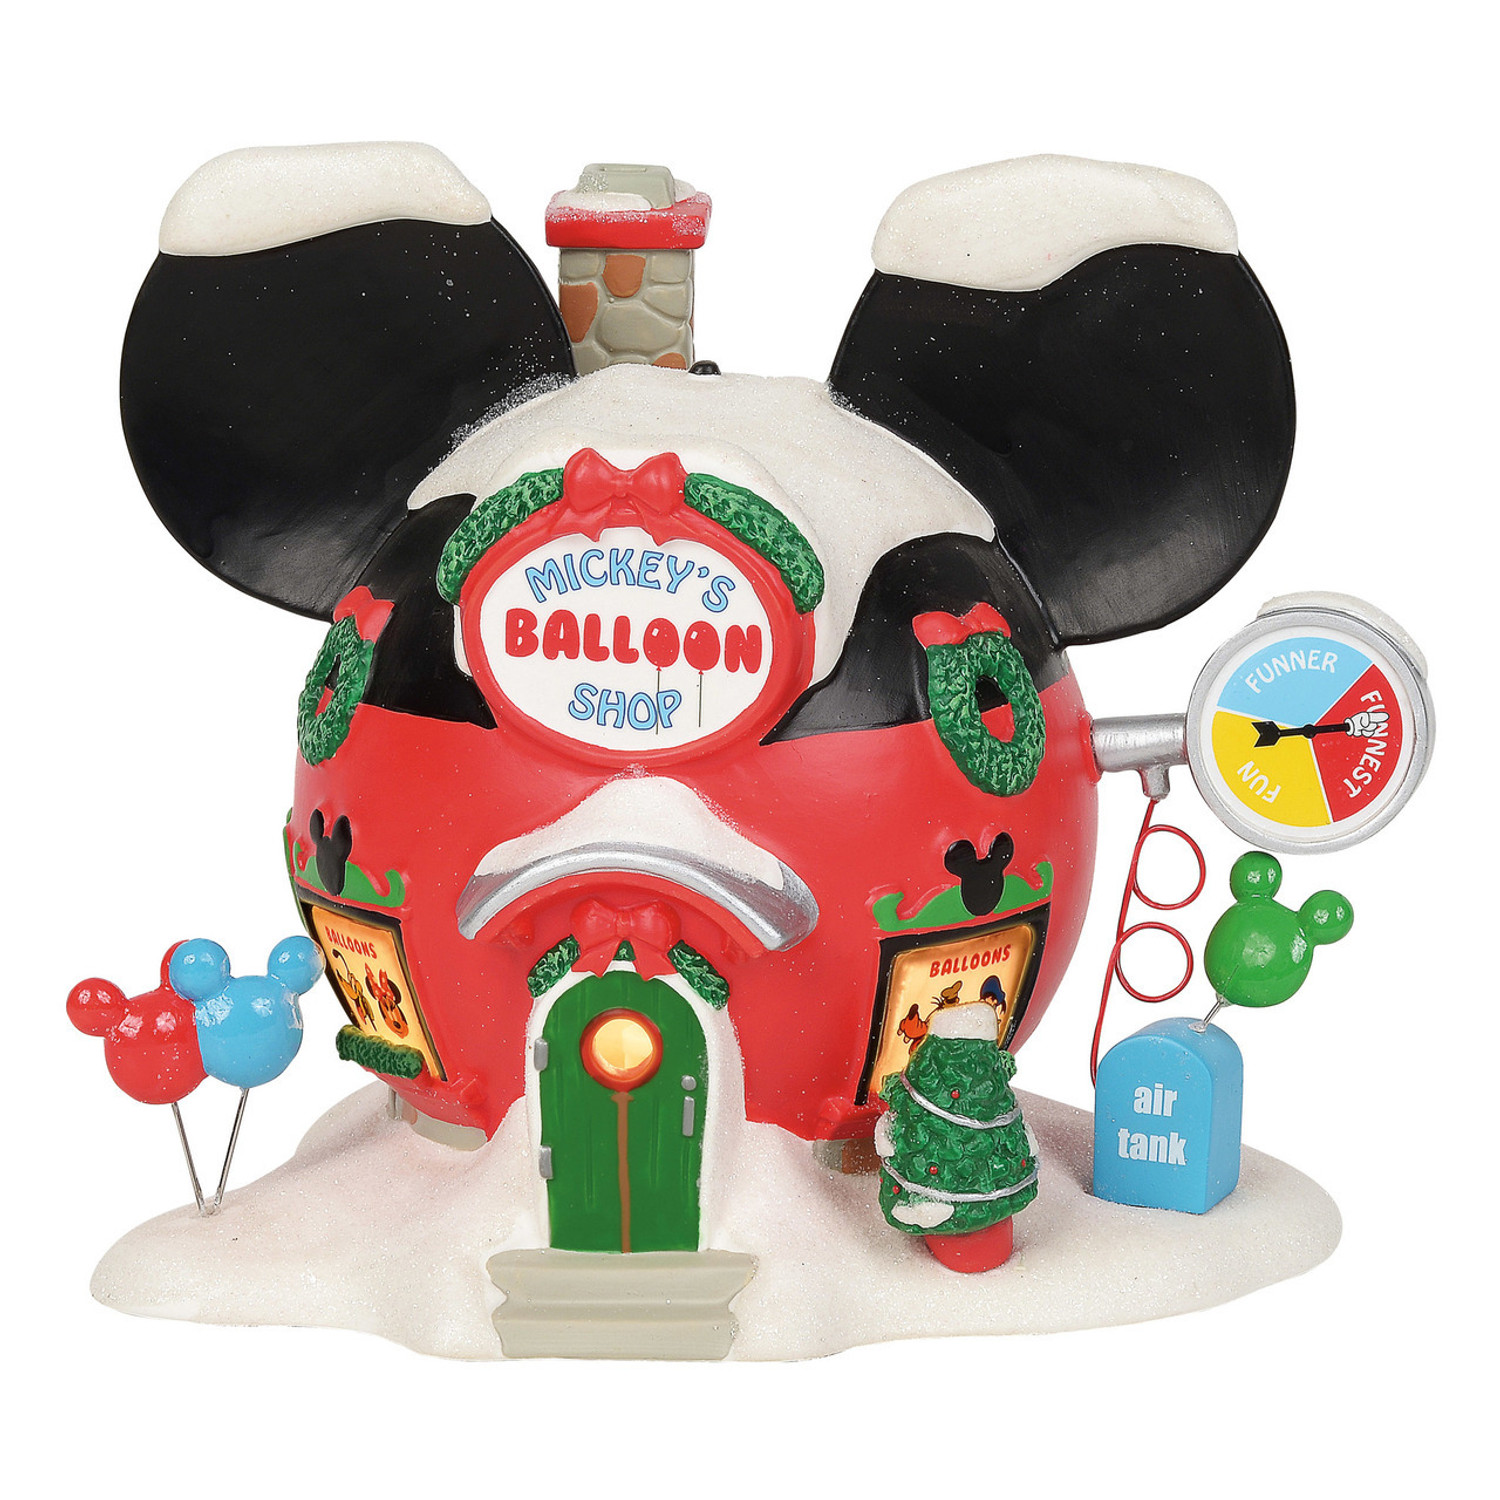 Disney Village Mickey's Clubhouse 6010492 – Department 56 Official Site